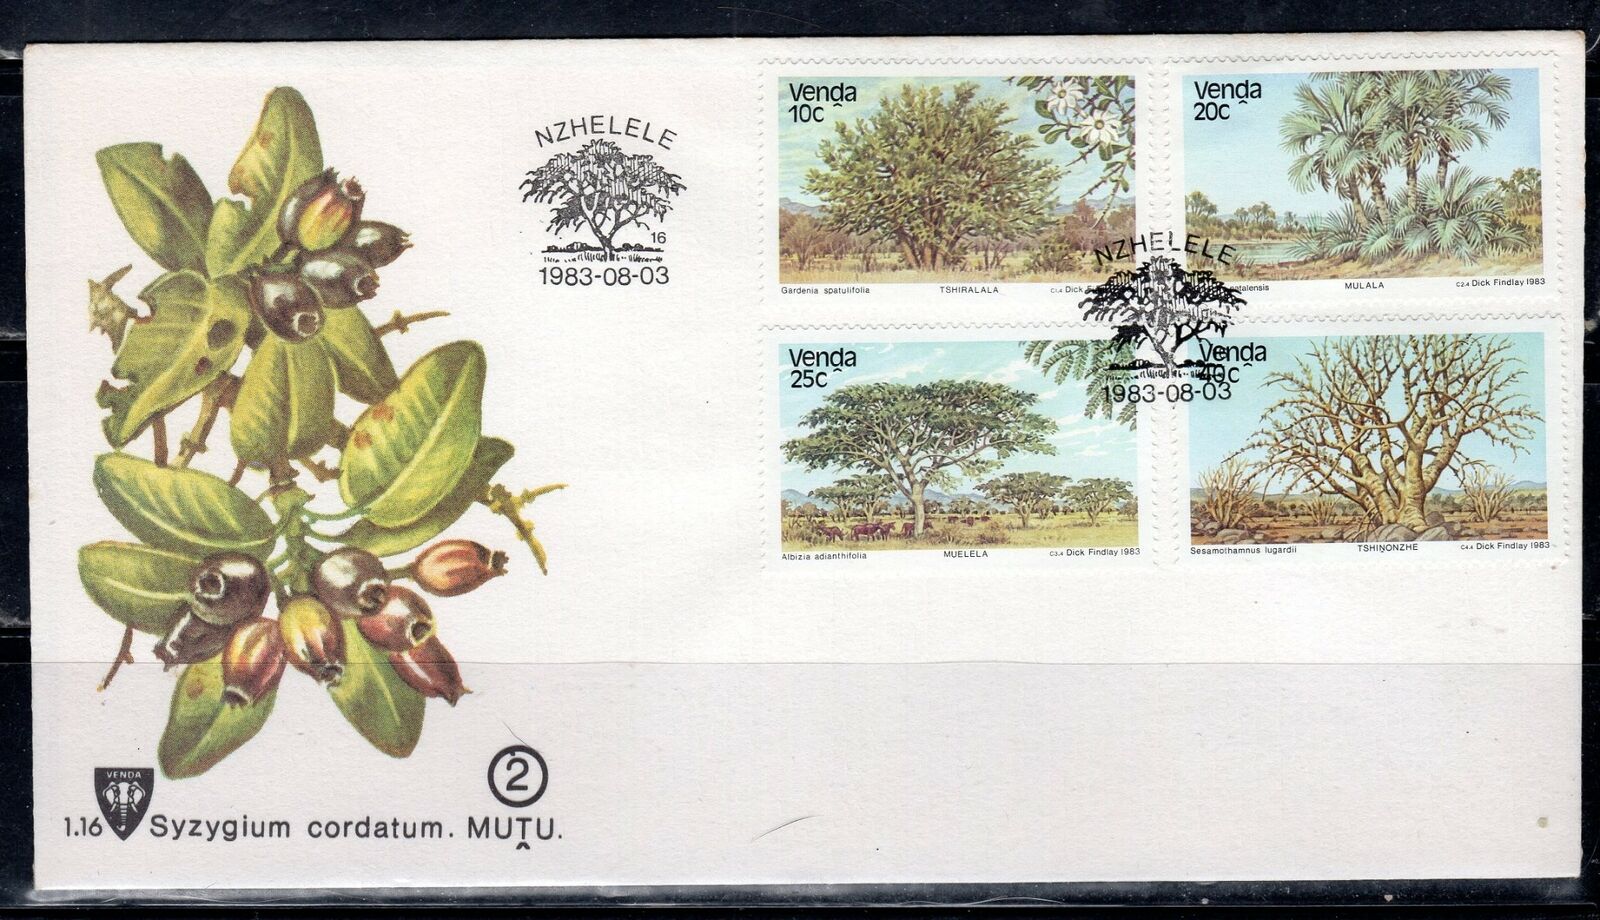 1983 Venda  Rsa South Africa Fdc First Day Cover Used   Lot 7761